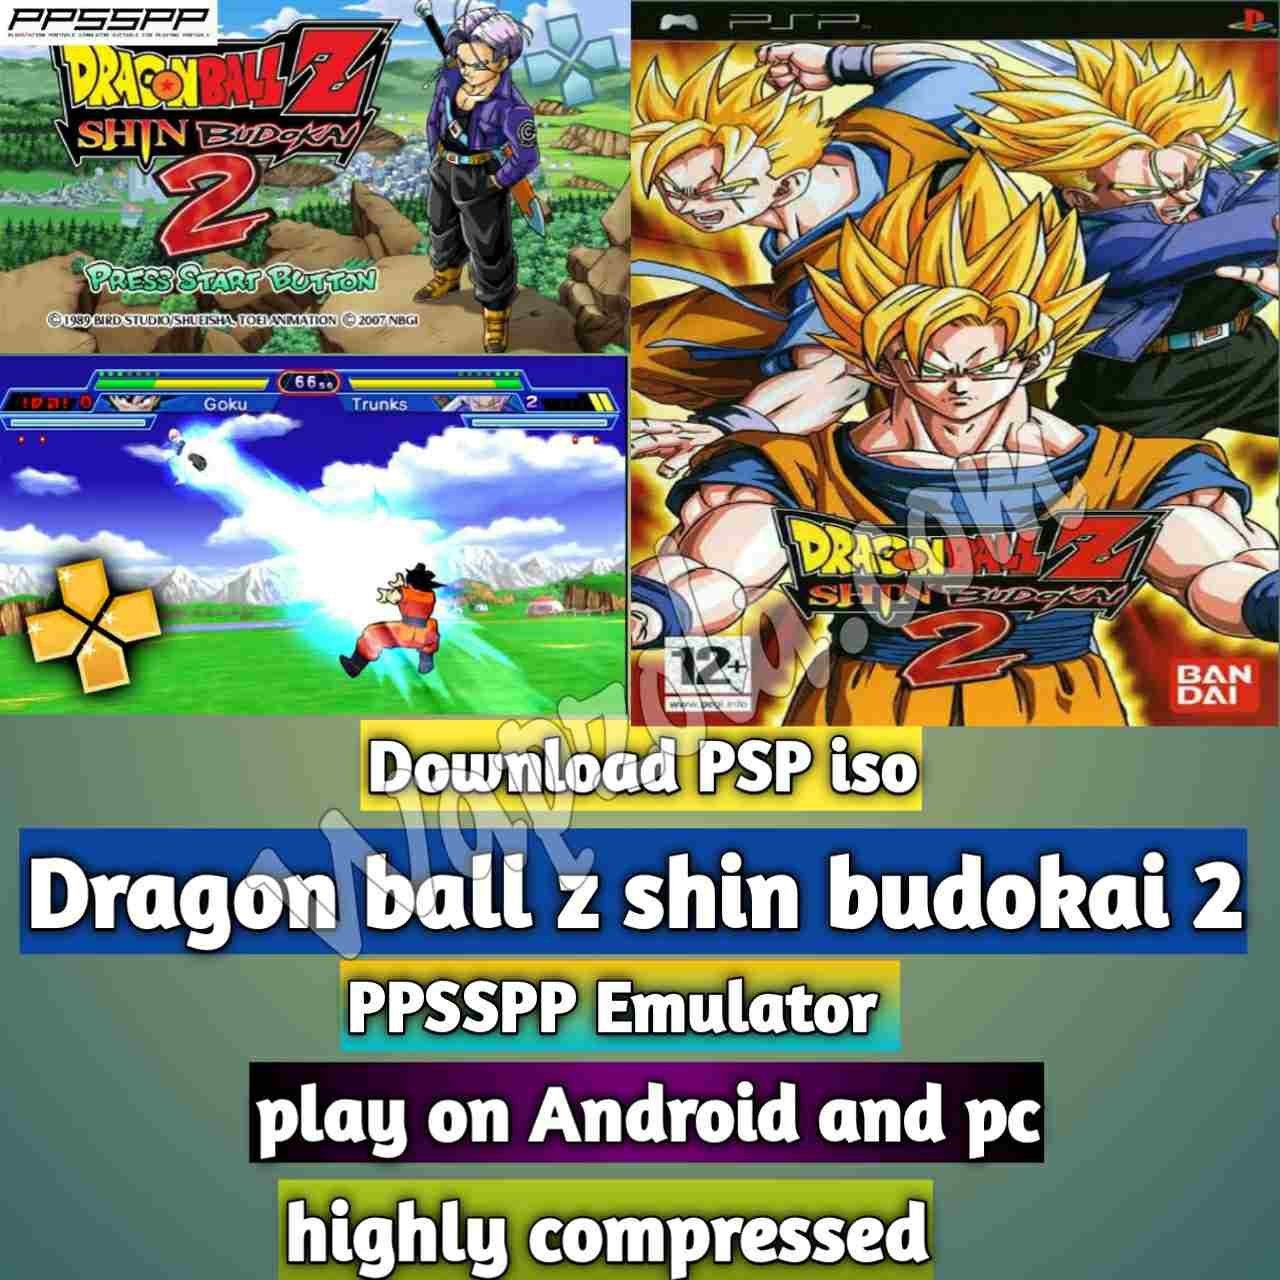 Read more about the article [Download] Dragon ball z shin budokai 2 iso ppsspp emulator – PSP APK Iso ROM highly compressed 300MB